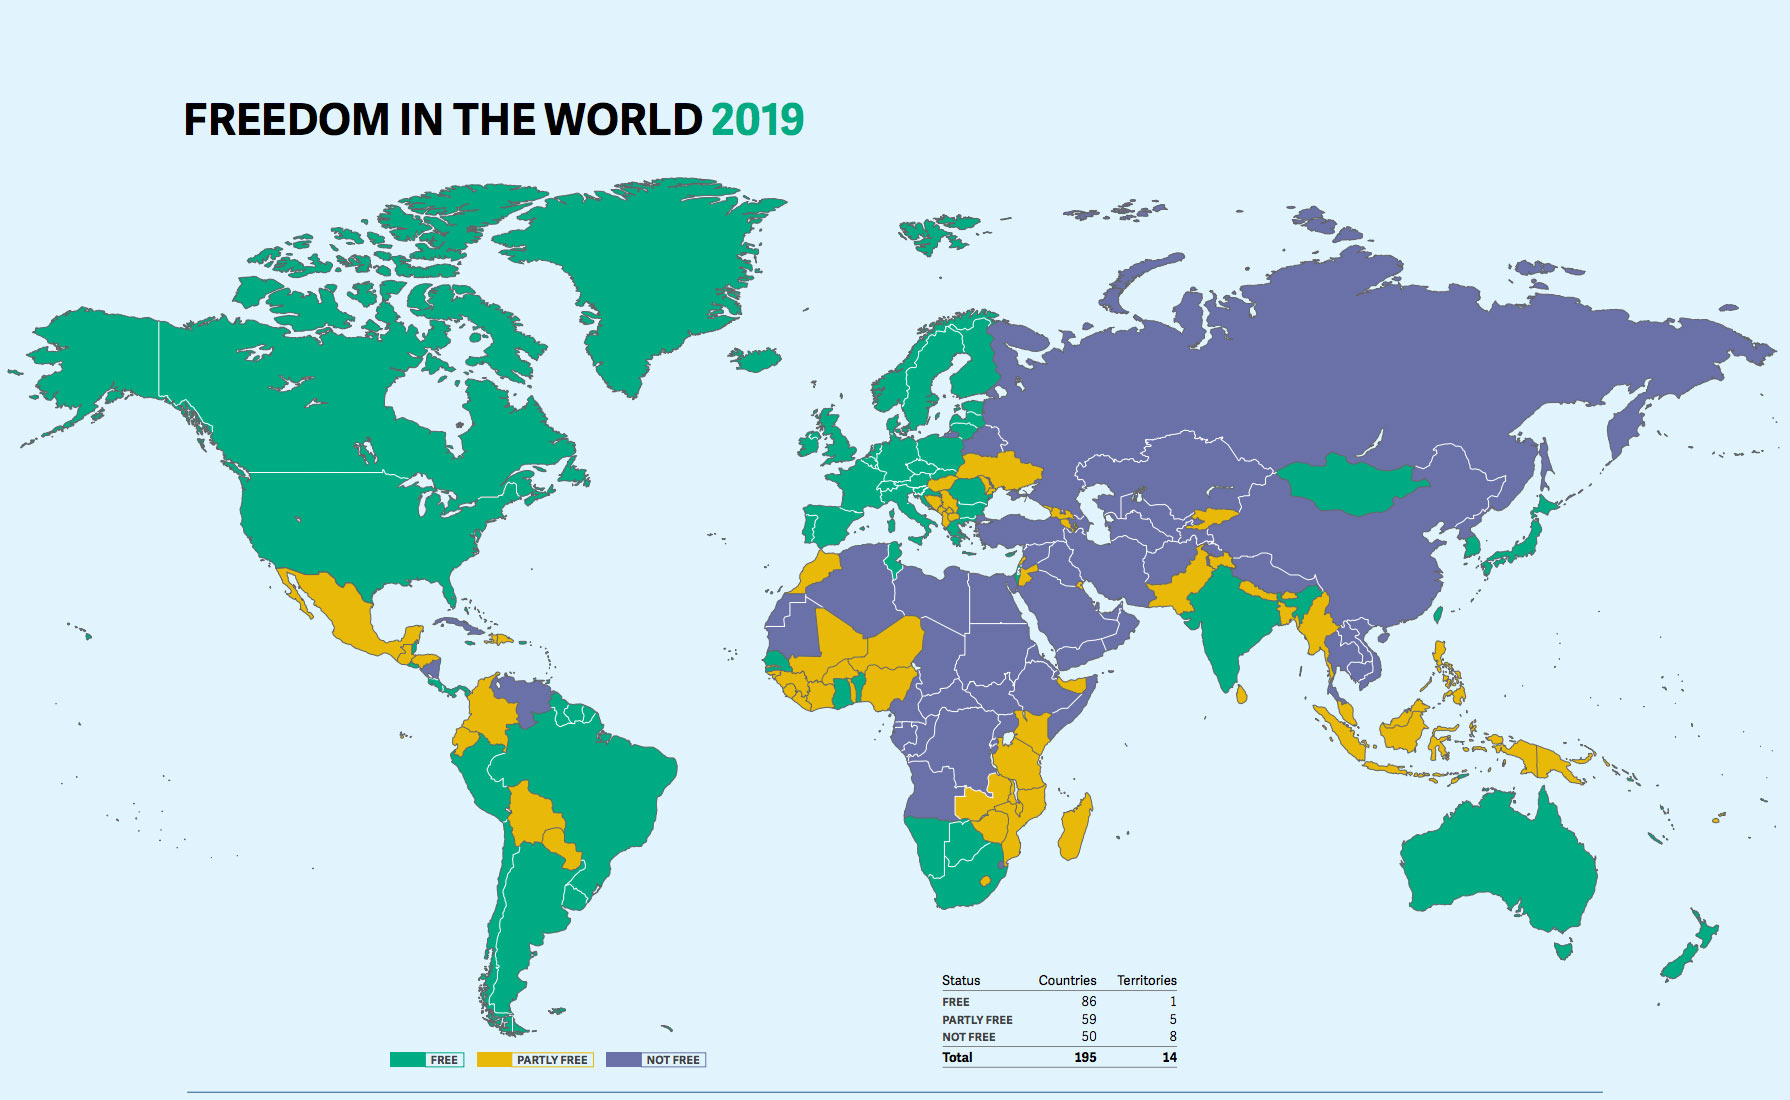 Freedom in the World in 2019